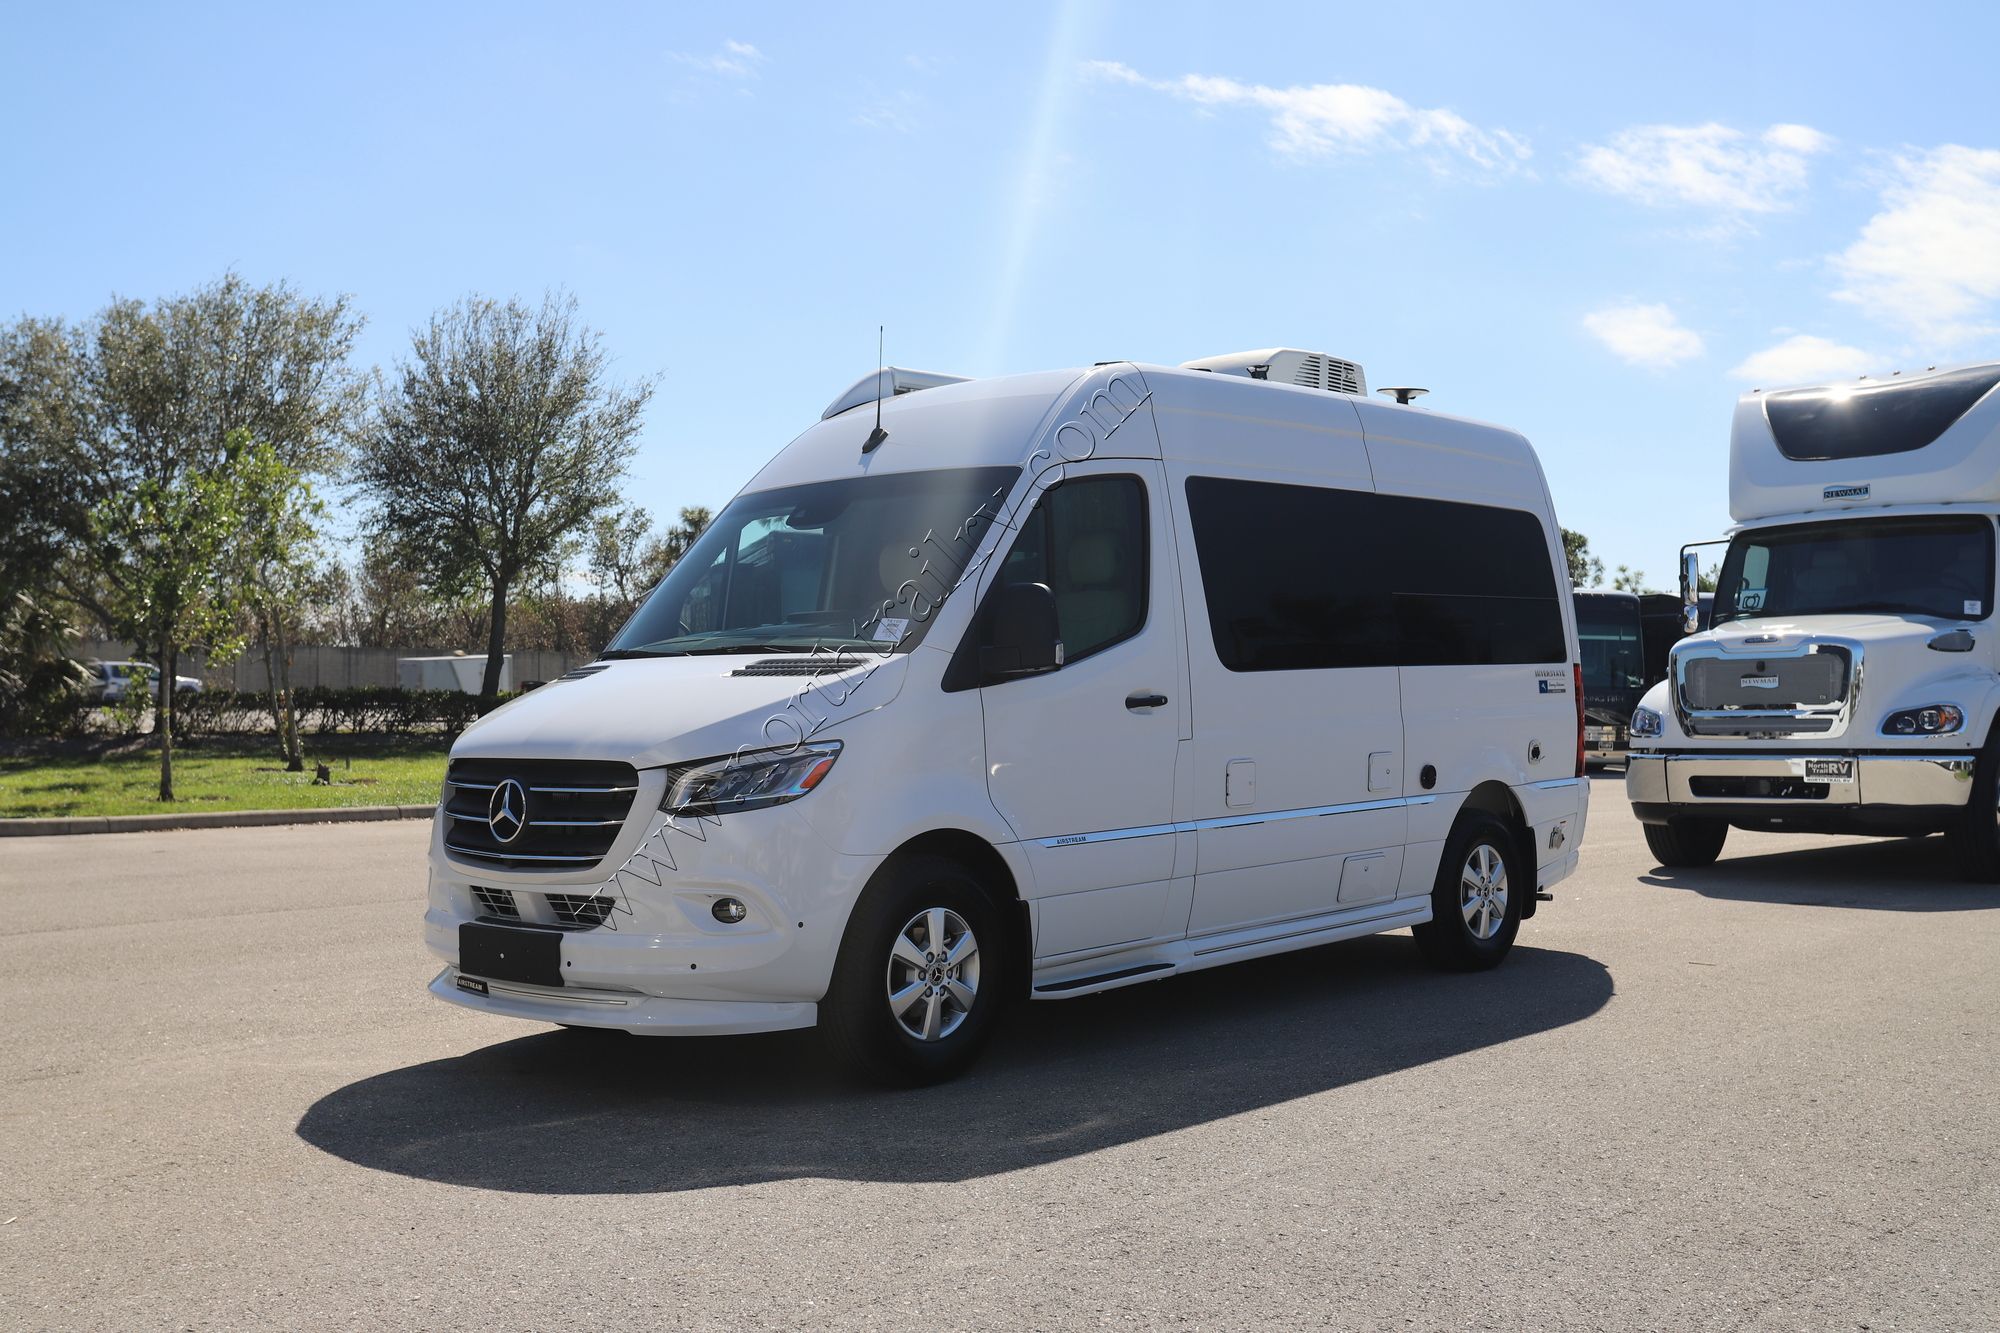 New 2023 Airstream Interstate 19 TB Class B  For Sale